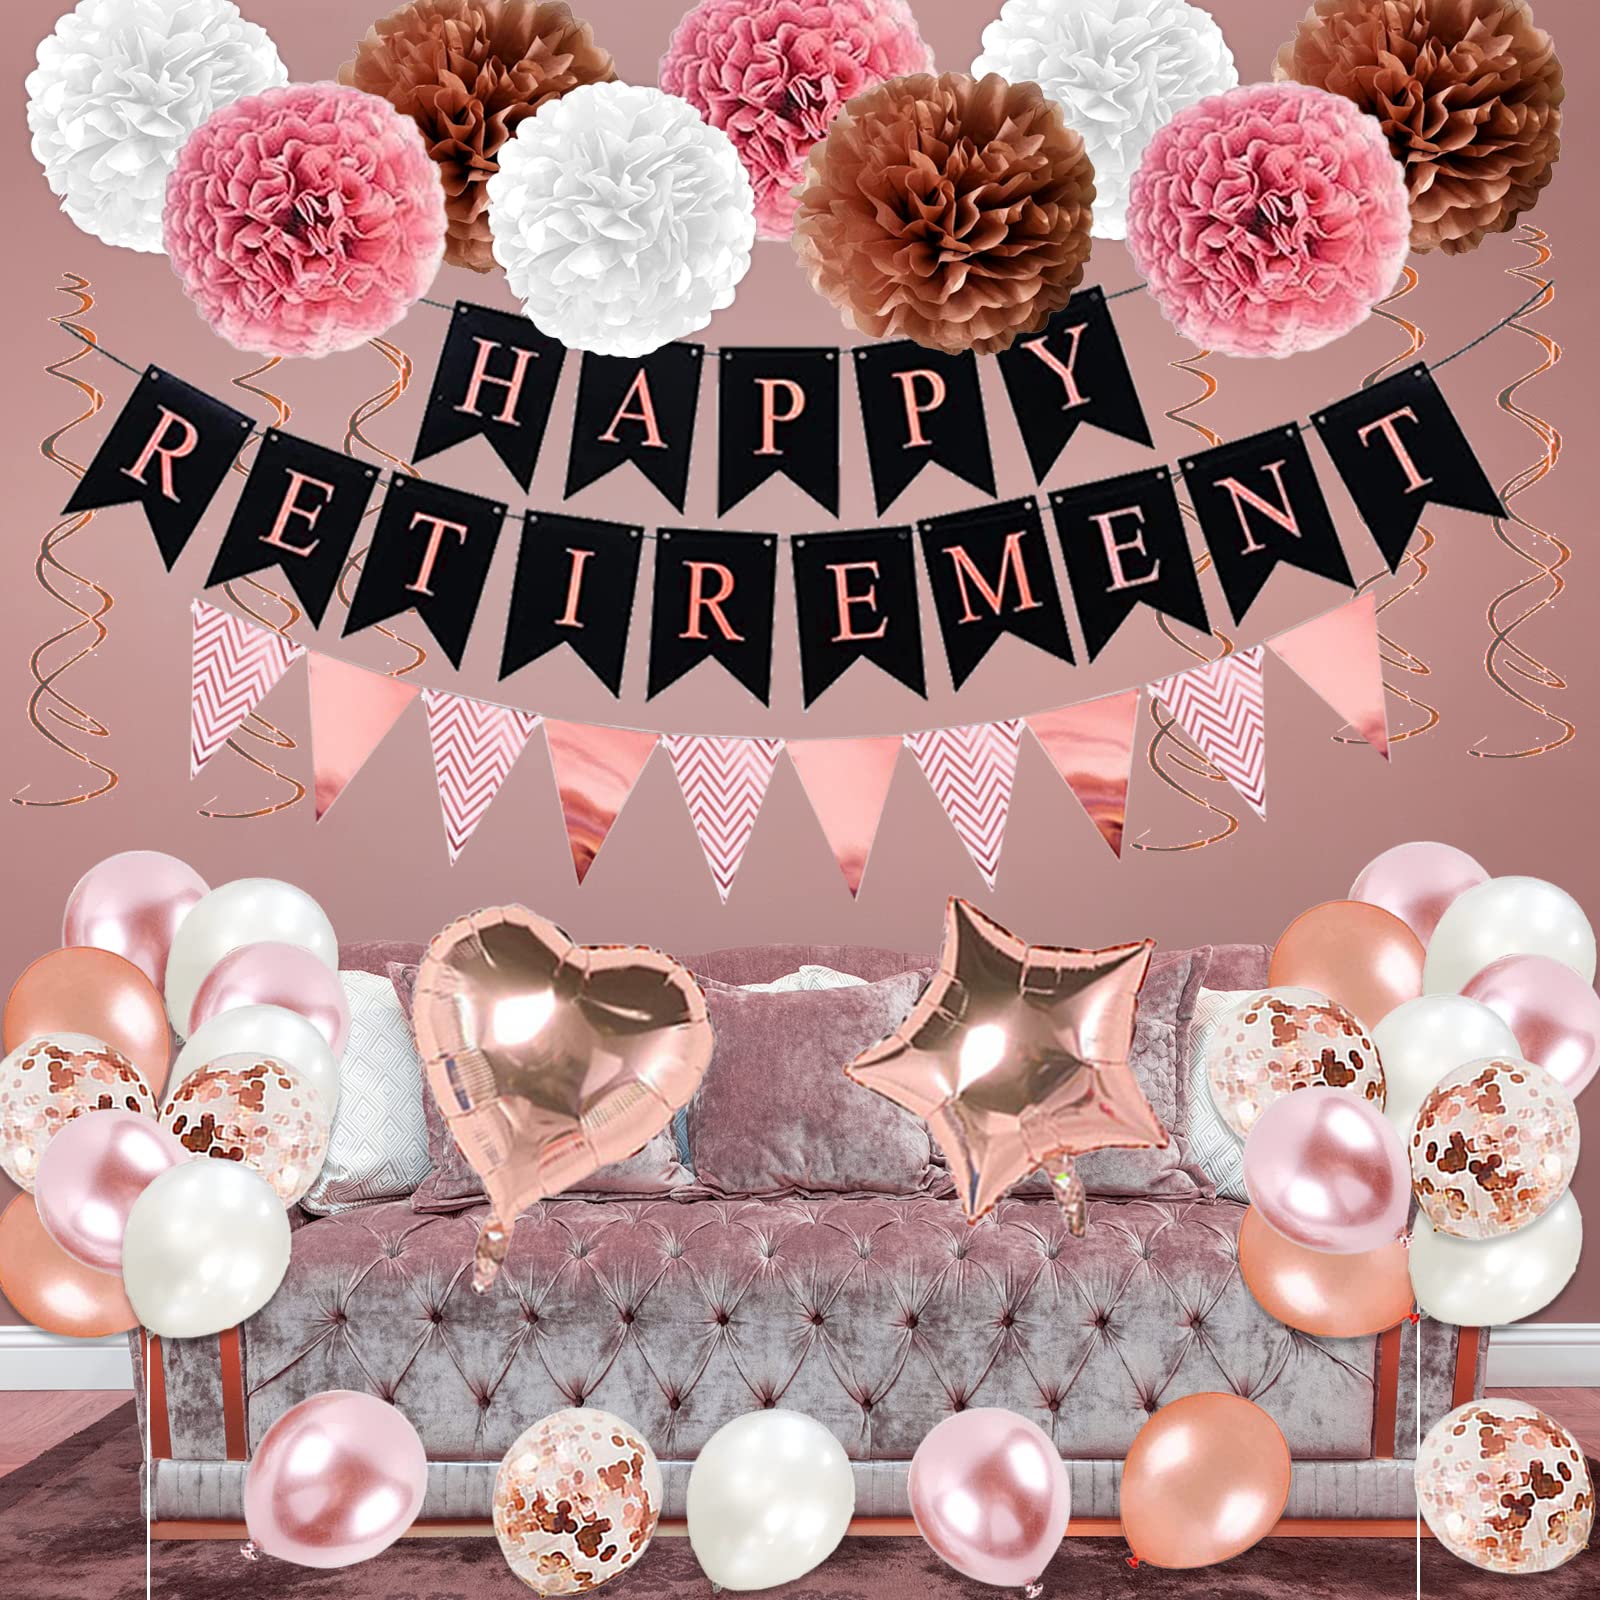 Rose Gold Retirement Party Decorations, 63 Pcs Retirement Party Decorations for Women Happy Retirement Banner Hanging Swirls Foil Balloon Cake Toppers Retired Sash Retirement Party Supplies